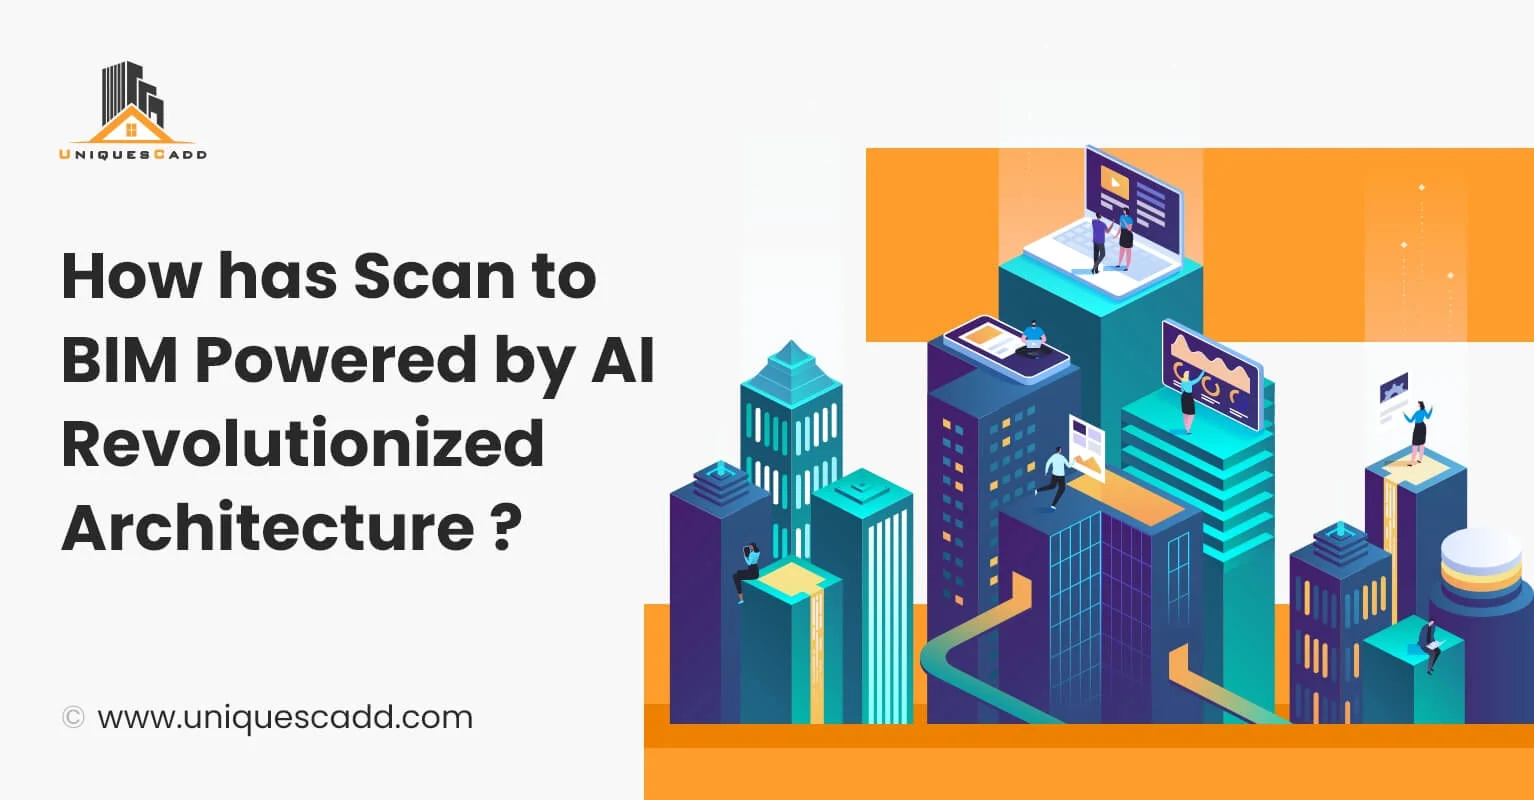 How has Scan to BIM Powered by AI Revolutionized Architecture